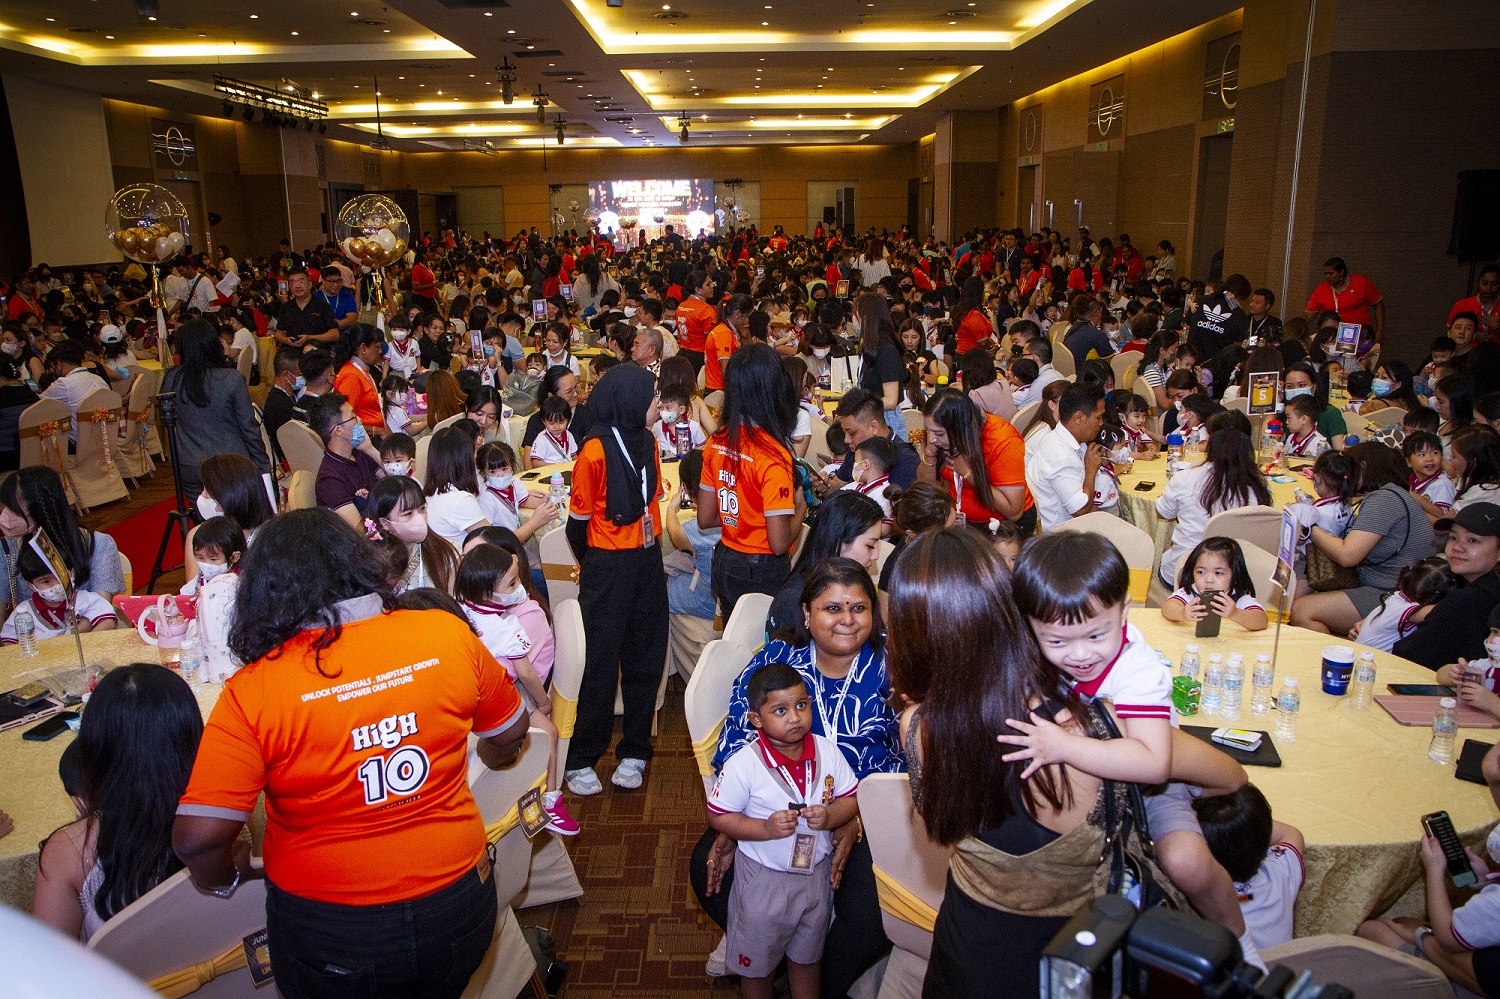 More than 2,000 people packed the Sunway Carnival Convention and Exhibition Center, creating a warm family atmosphere.